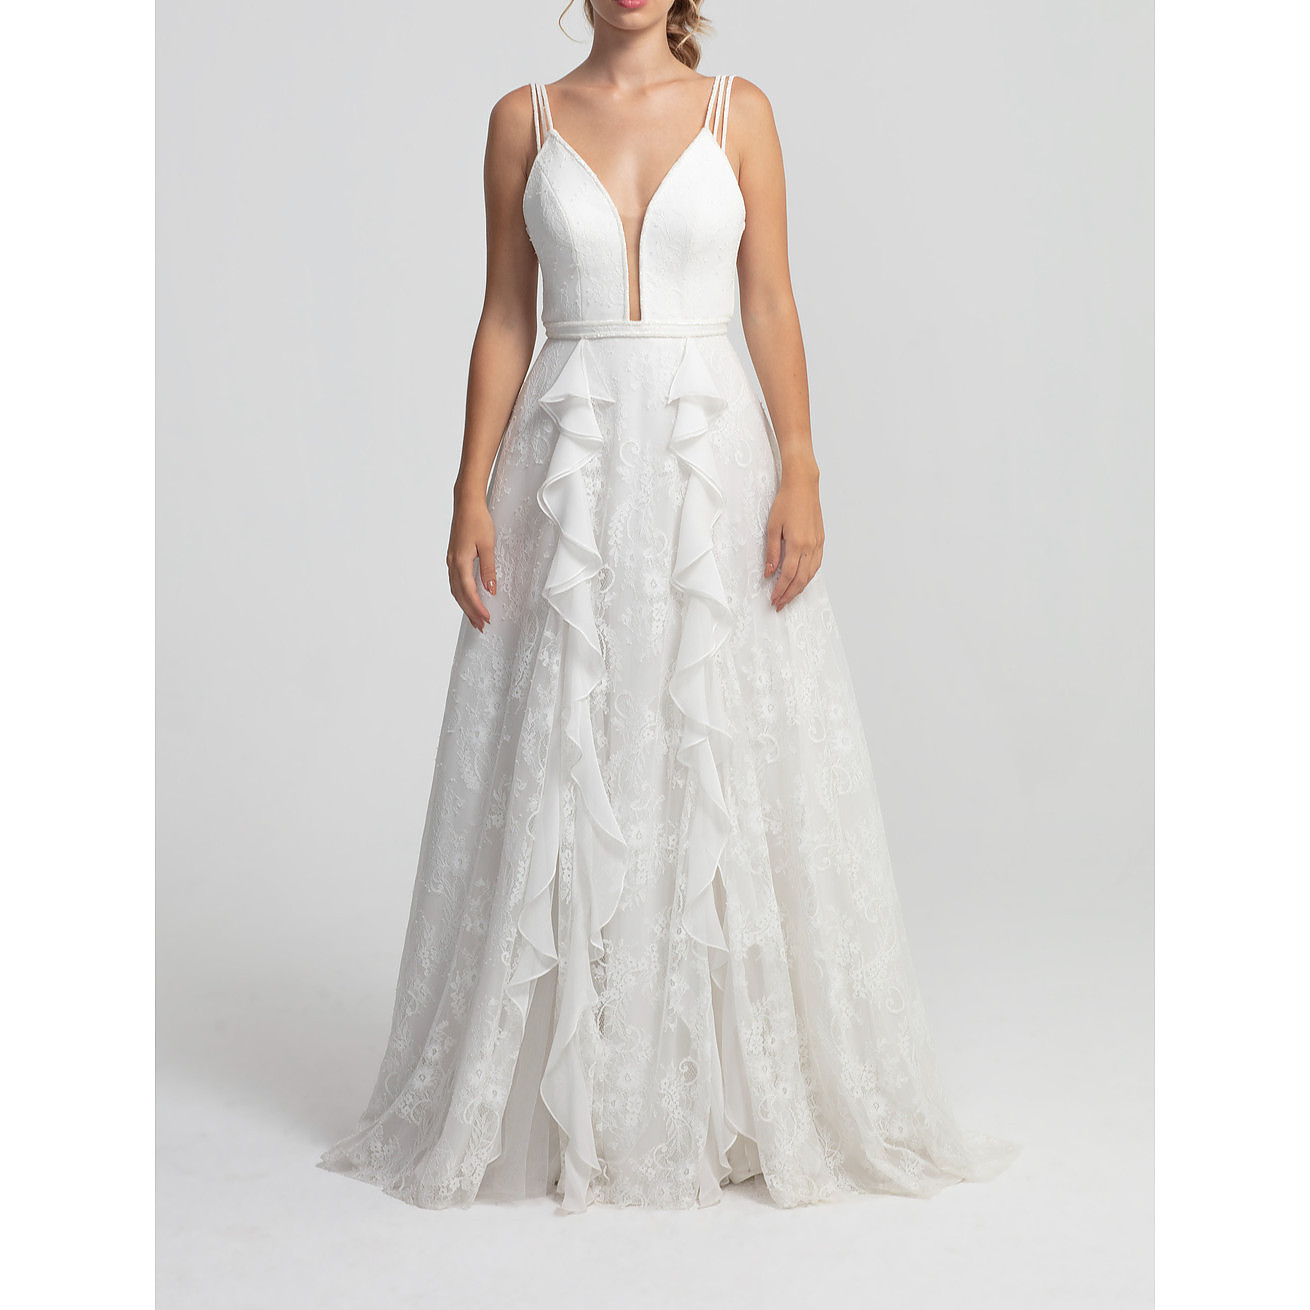 Barrus London French Lace Wedding Dress With Decollete Neck